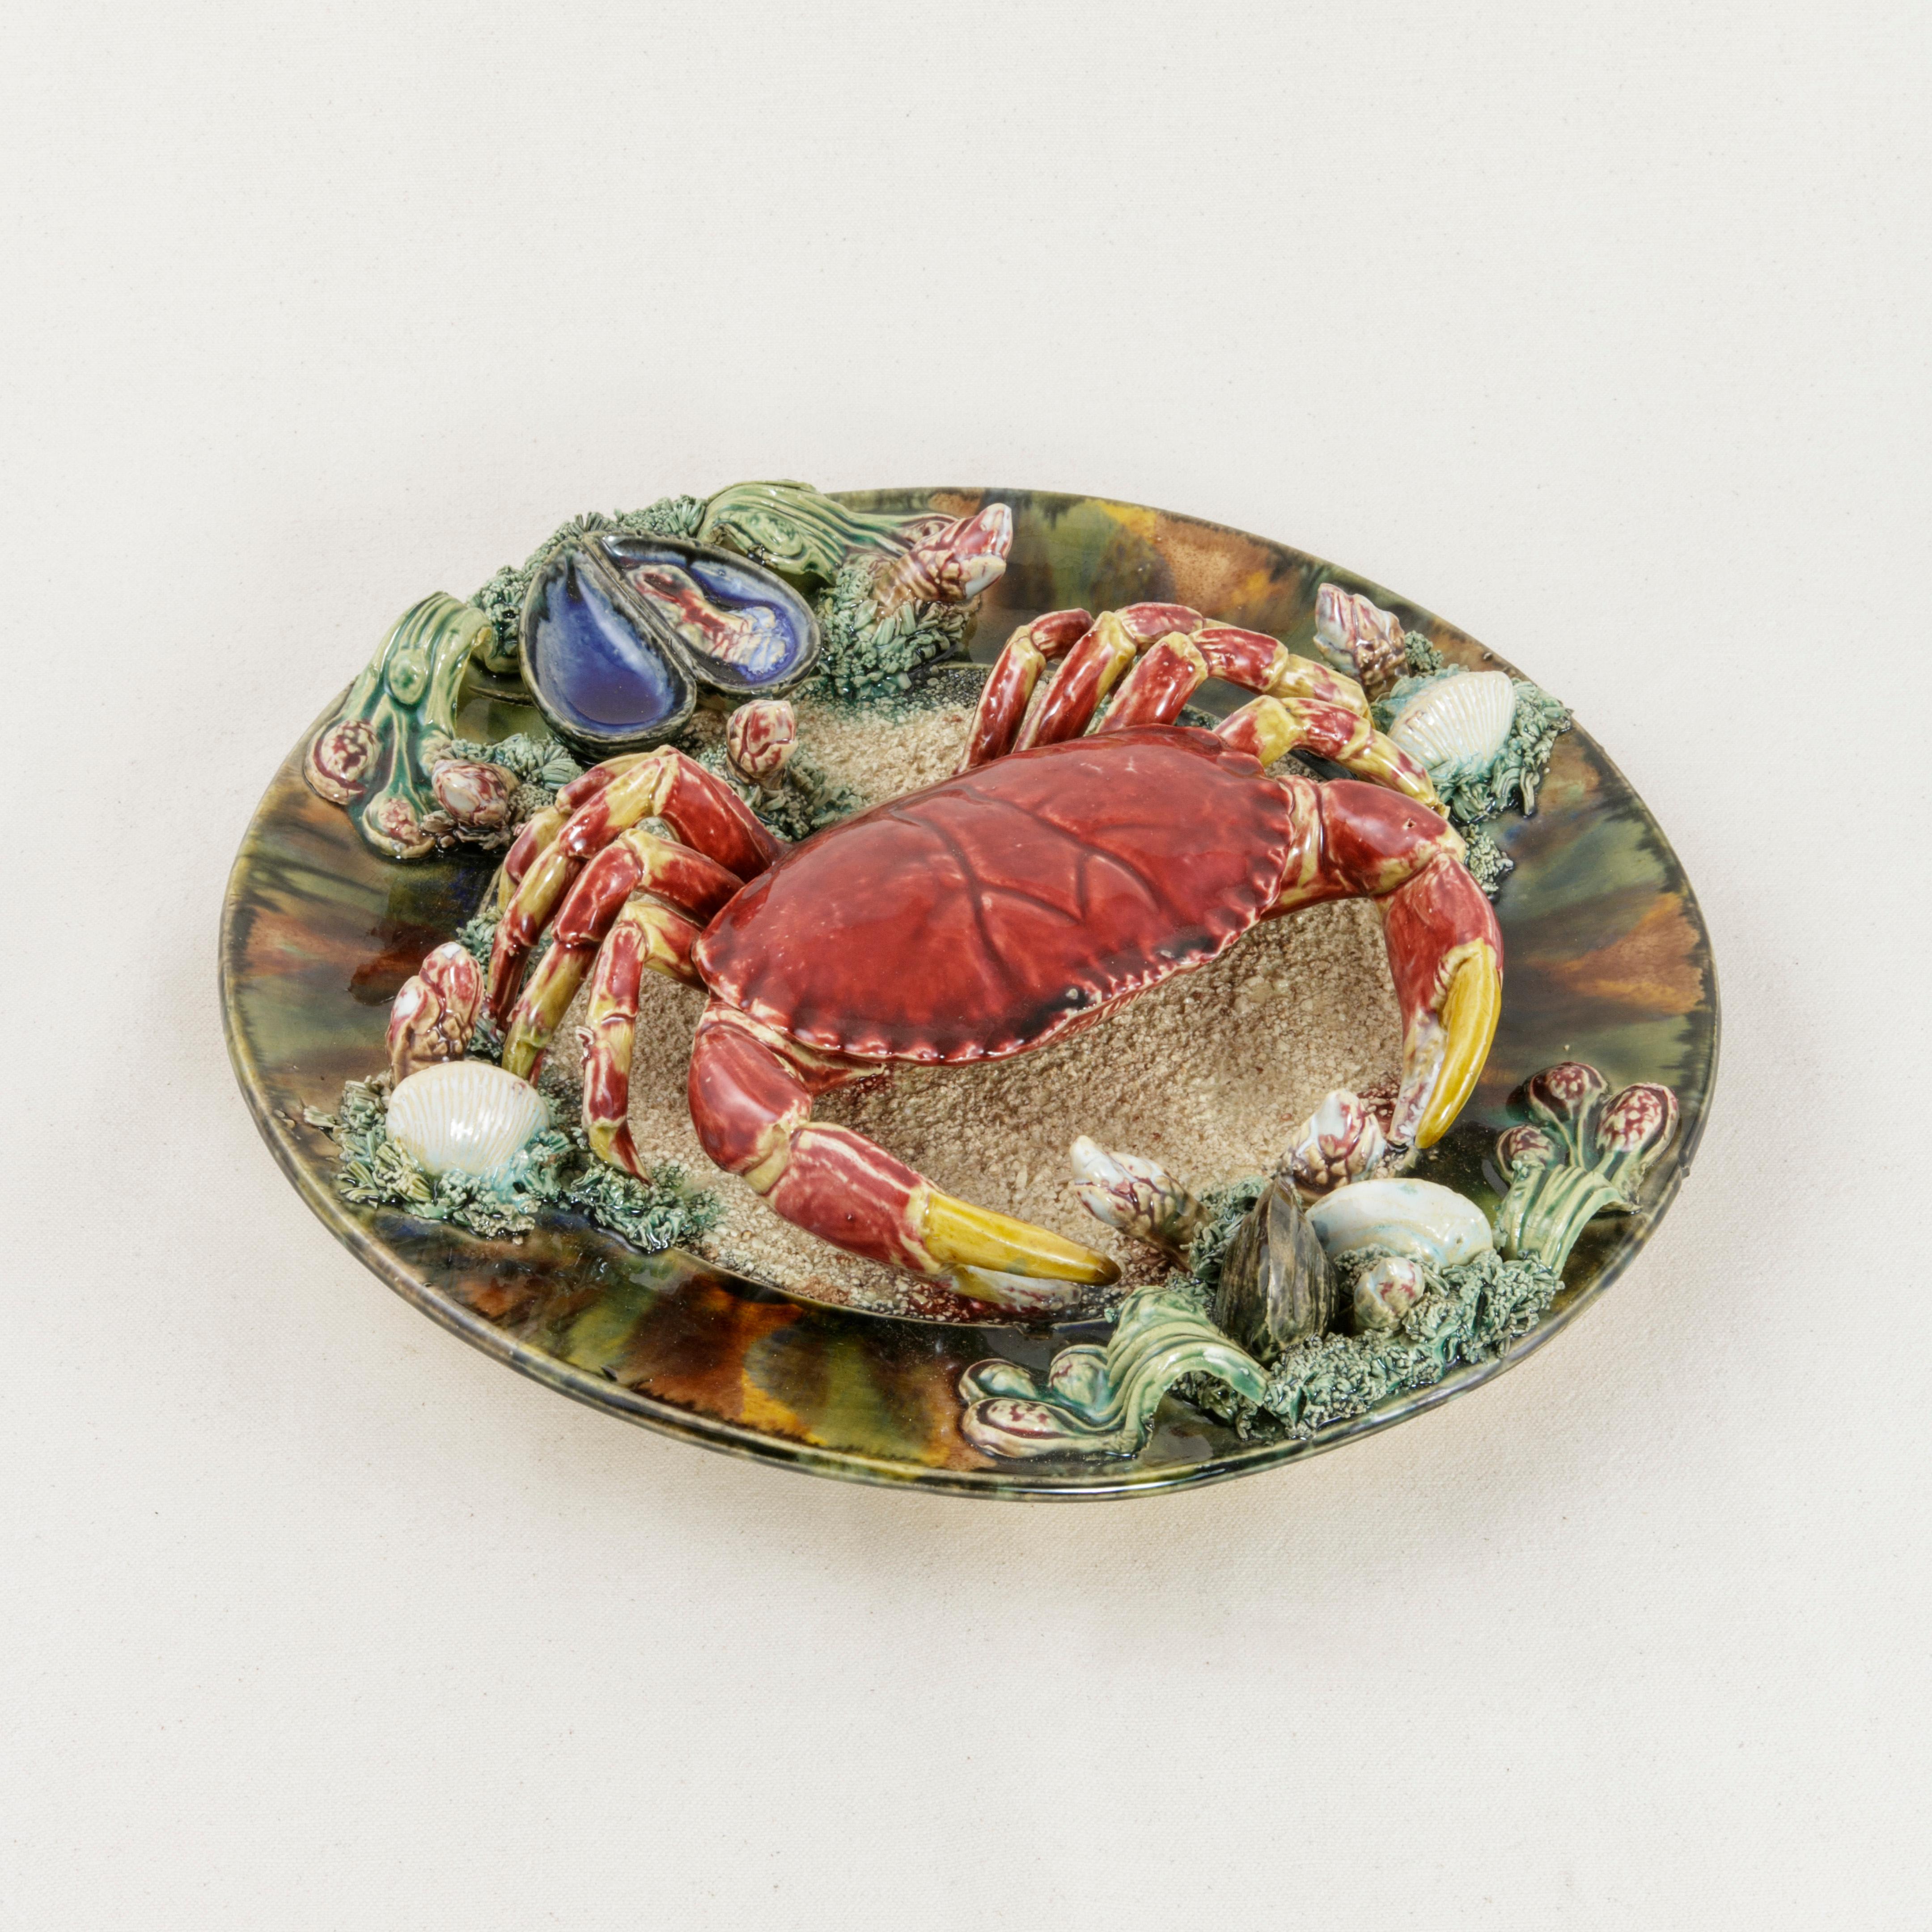 This large Portuguese Majolica Palissy style plate from the mid-20th century is glazed with vivid colors and features a hyper-realistic high-relief crab occupying the center of the plate. The crab is surrounded by elements of the sea such as mussels